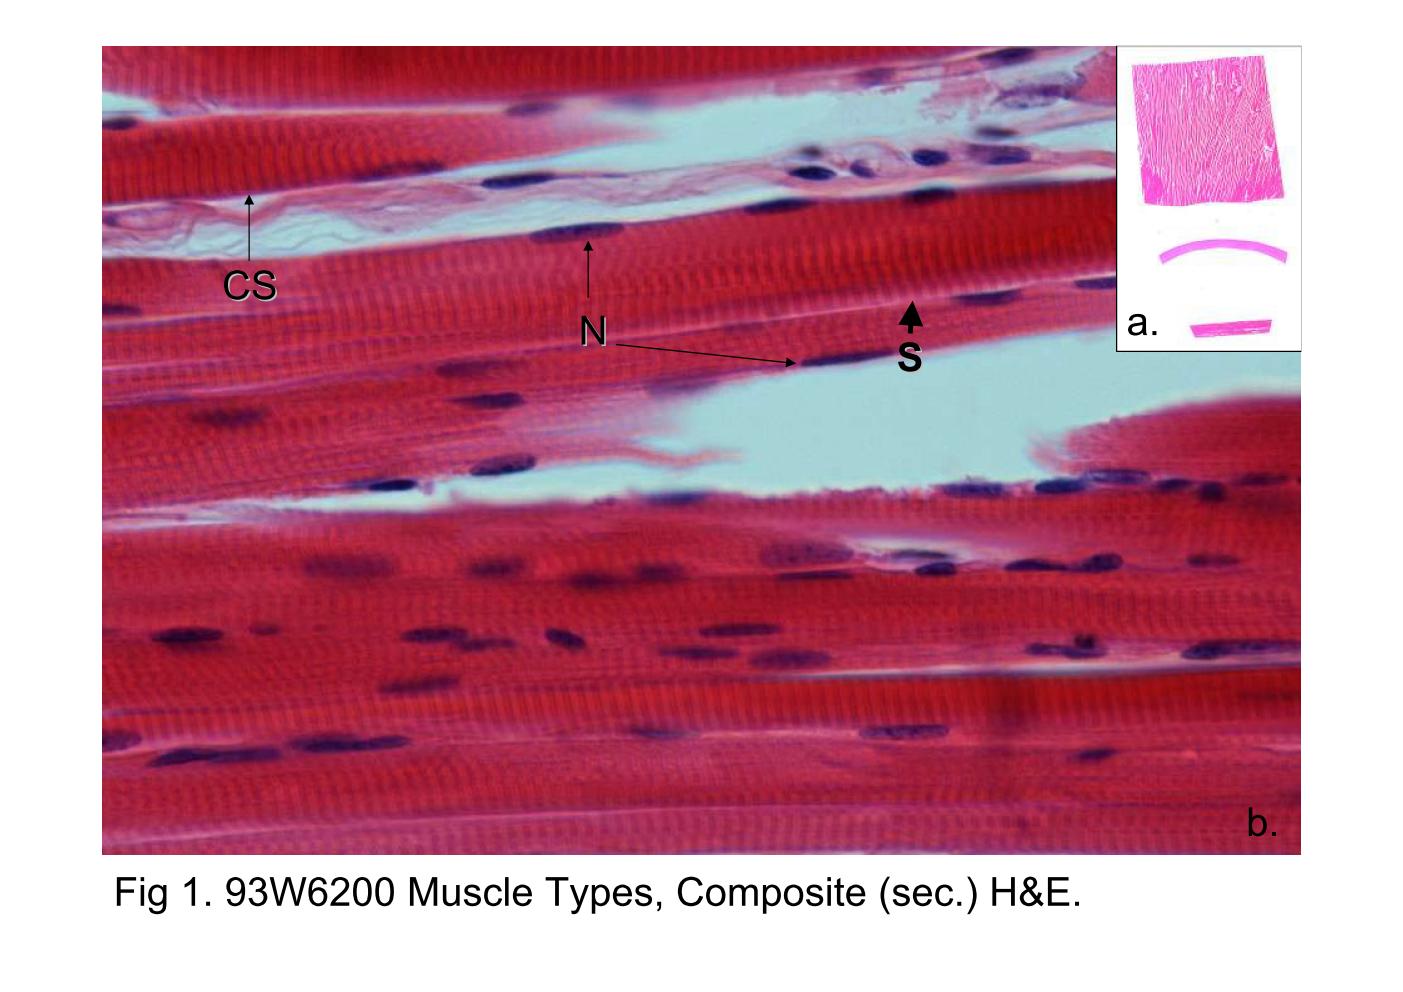 block6-2_05.jpg - Fig 1. 93W6200 Muscle Types, Composite (sect) h&e.Fig 1a. There are three tissues in this slide: upper, cardiacmuscle; middle, smooth muscle; lower, skeletal muscle.A longitudinal section of skeletal muscle fibers is shown in Fig1b. Cylindrical skeletal muscle fibres arranged in parallel,unbranched patterns with multinuclei (N, arrow) where isperipherally location. The most important characteristic ofmuscle fibers are the cross-striations (CS) appearance andbetween two striation is a intact functional unit, calledsacromere (S) (upper right, arrow head).